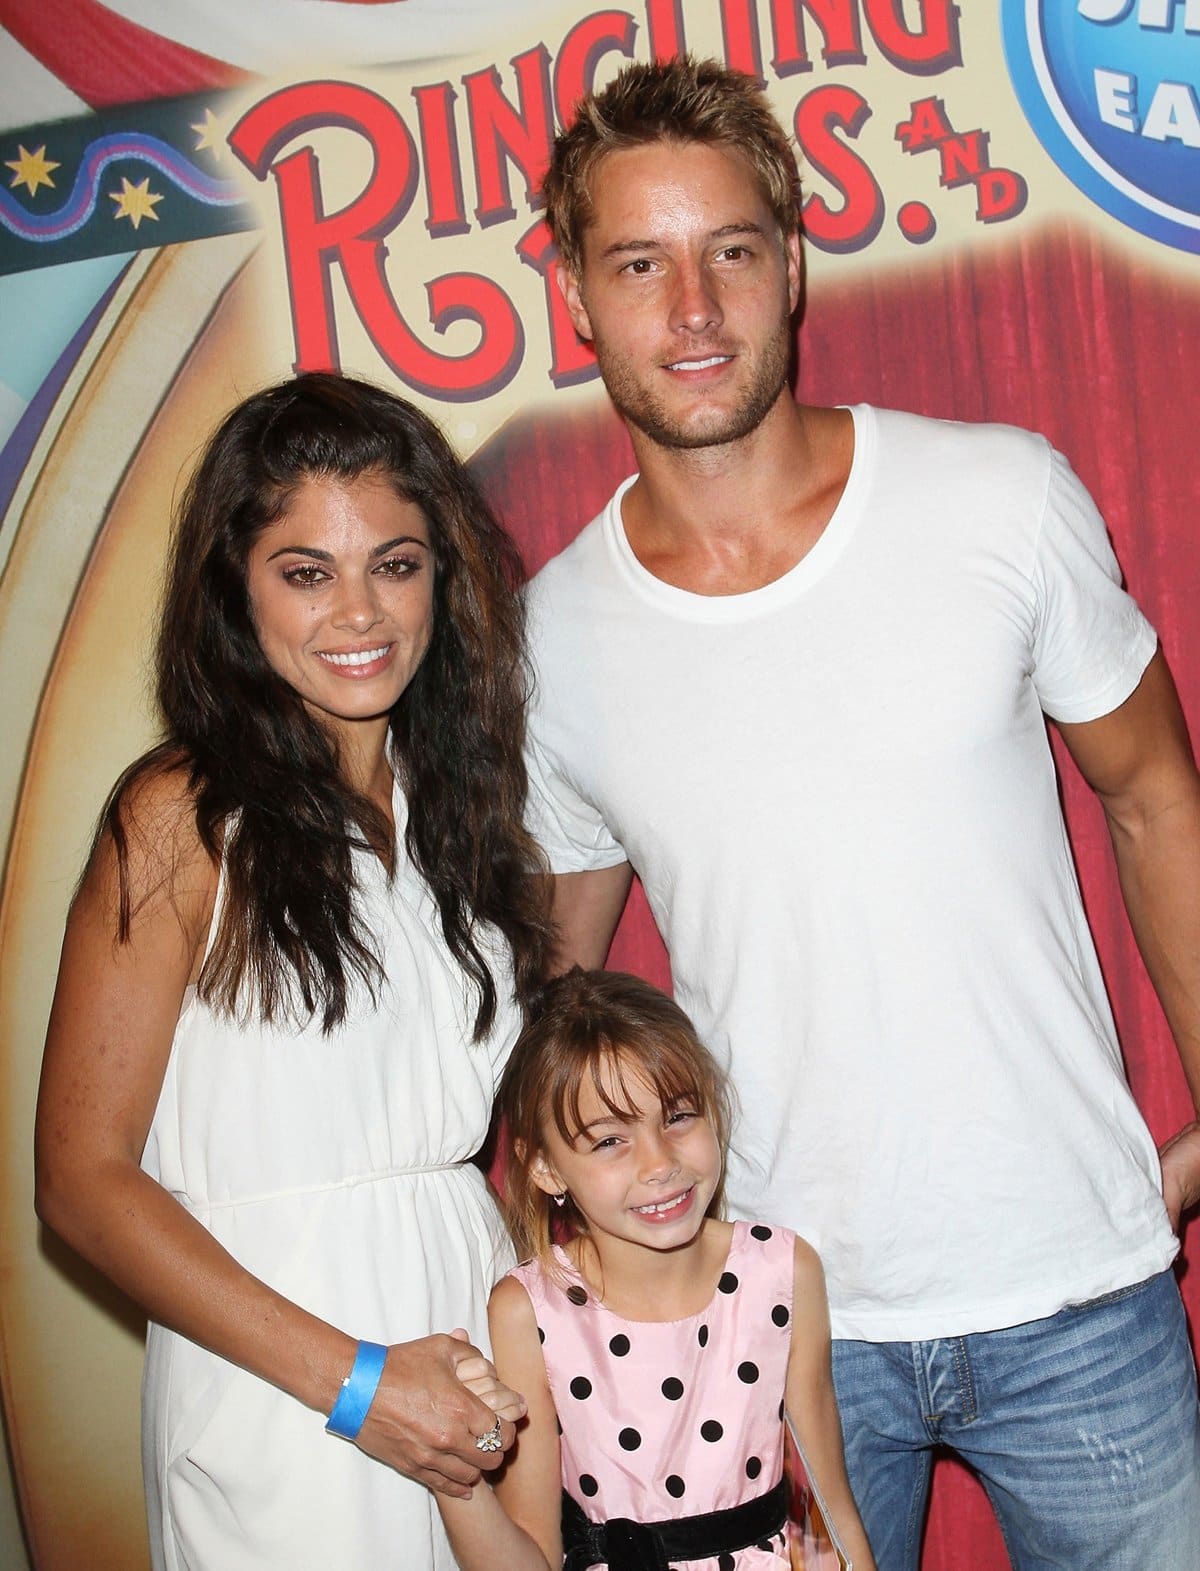 Actress Lindsay Hartley, daughter Isabella Hartley and husband actor Justin Hartley attend Ringling Bros. & Barnum and Bailey & Starlight Children's Foundation's premiere of "Fully Charged"